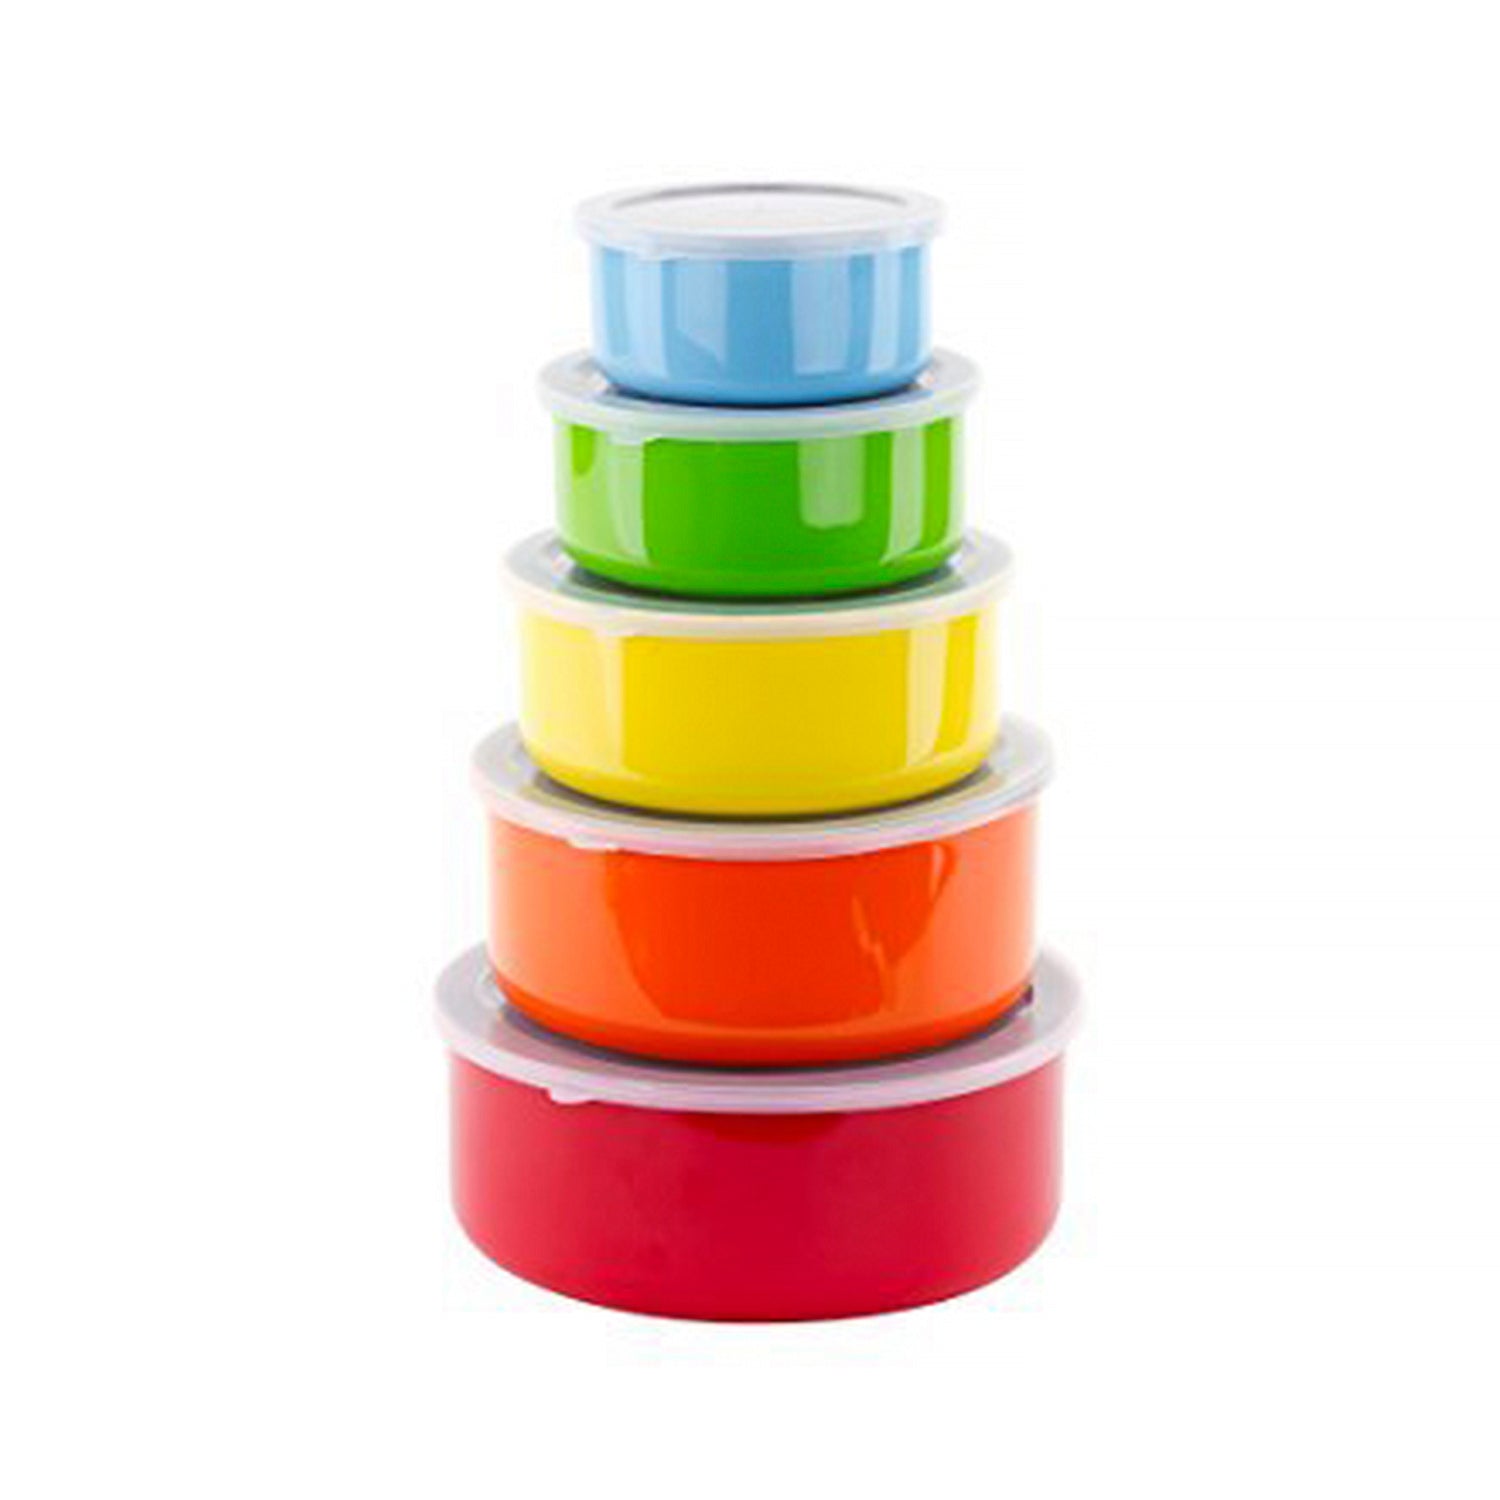 10 Pcs Colorful Stainless Steel Mixing Bowls or Food Storage Containers Set w/Lids